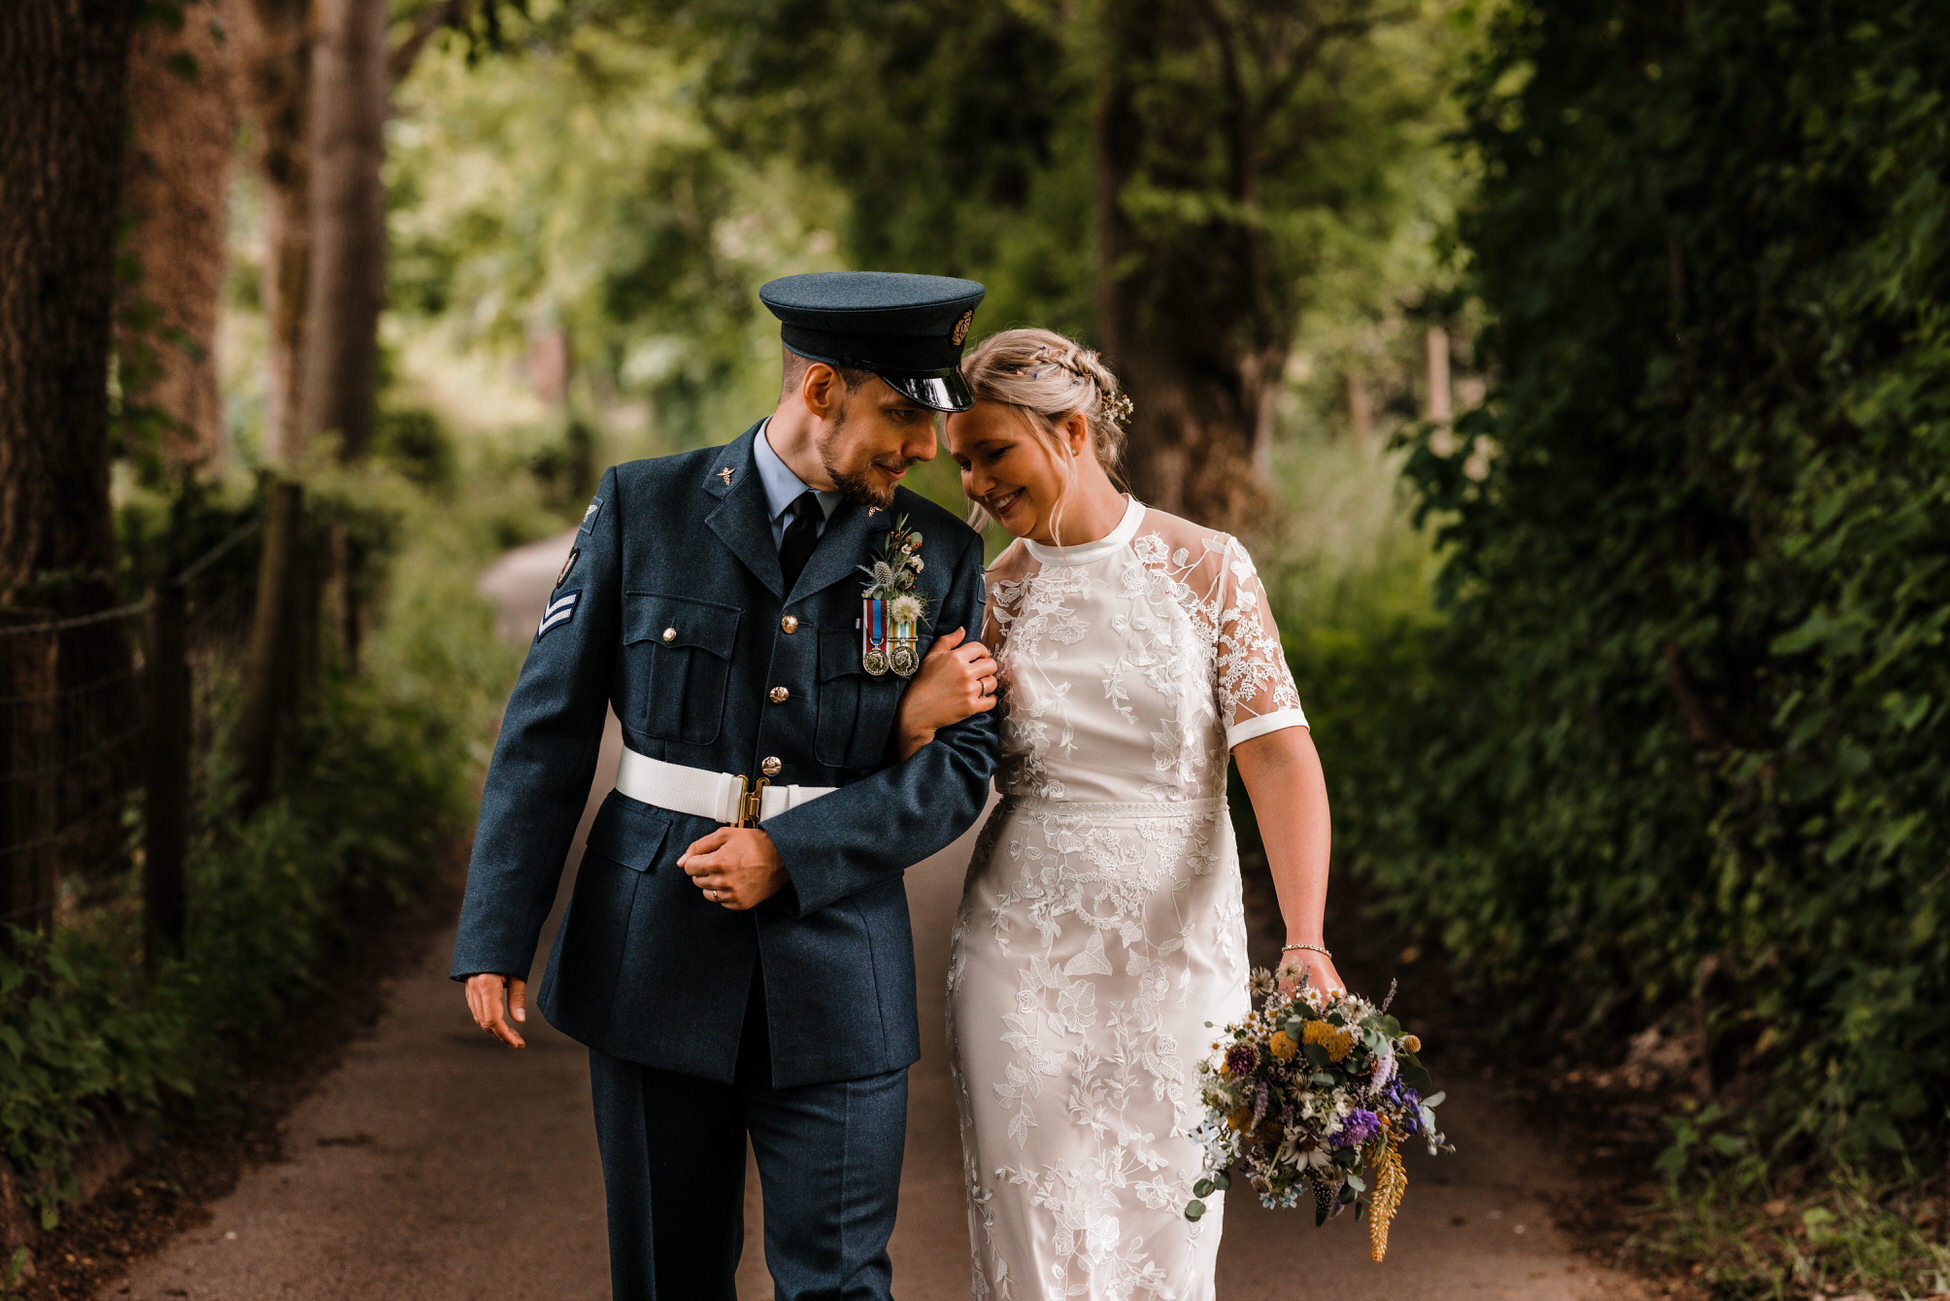 Josh and Lizzy just after their wedding ceremony strolling arm in arm. He's in military uniform and she's carrying a bouquet. By Tom Hodgson Photography